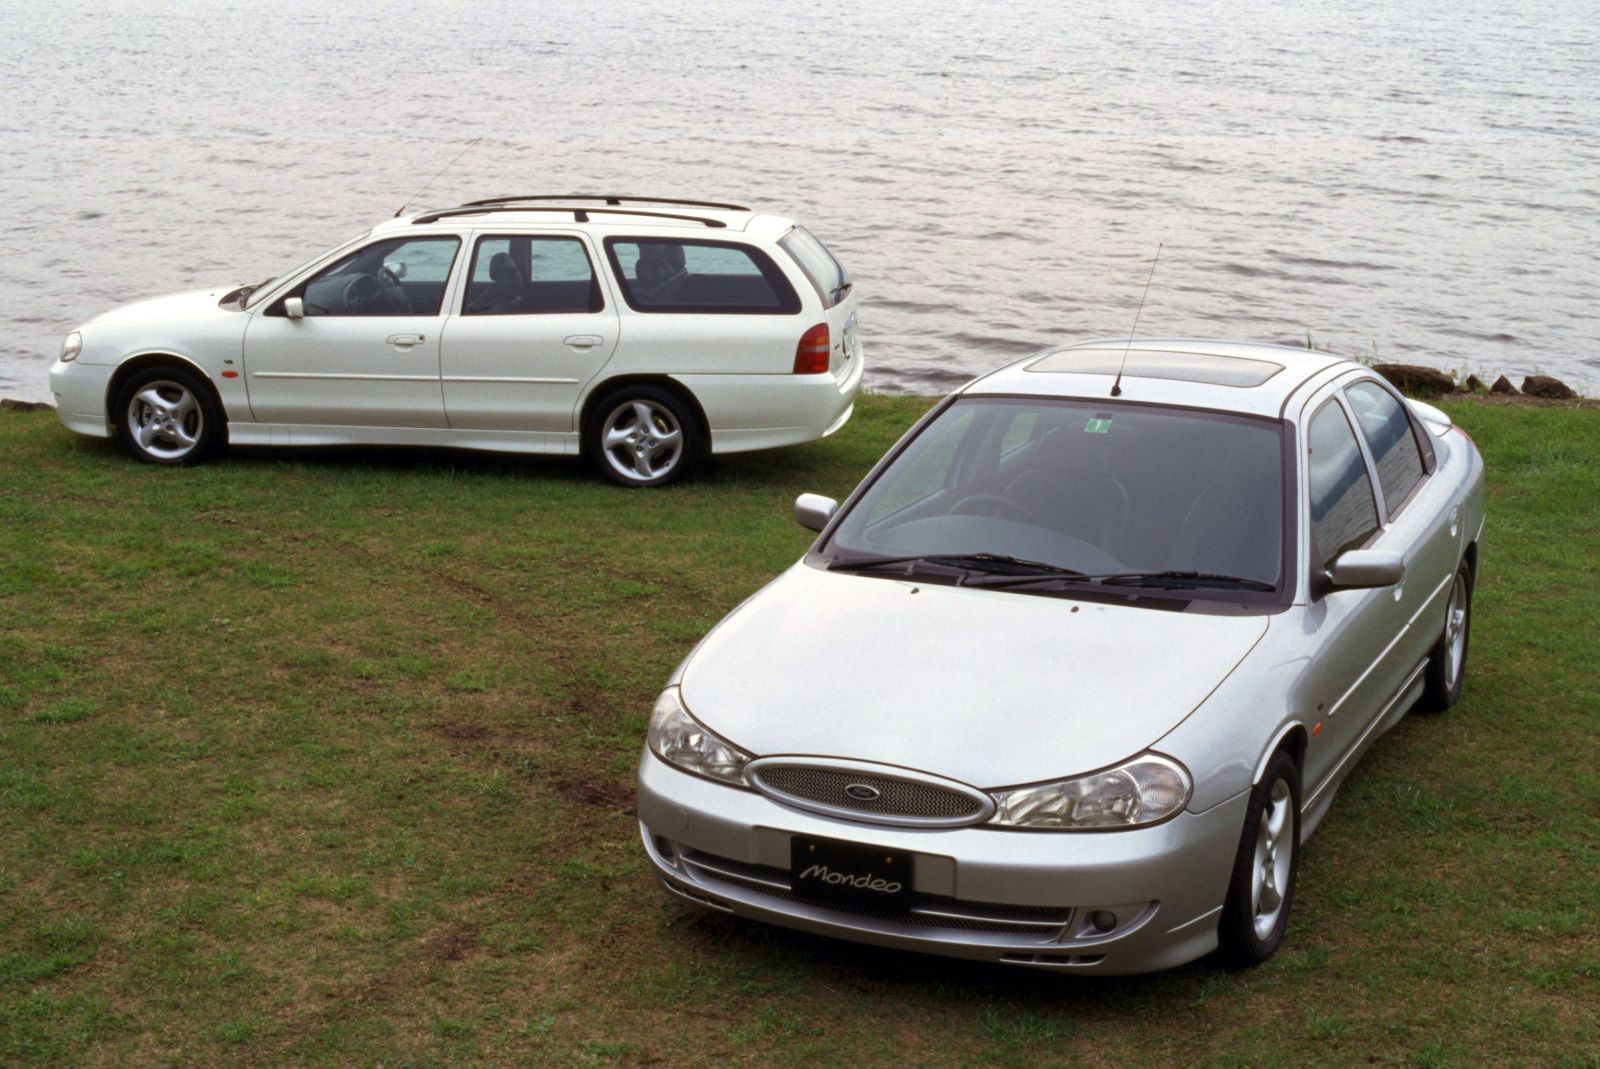 Rather than power output like later models, it was named after it’s (unchanged) 24-valve V6 engine. I think this was because it was the cheapest way to get the V6 when it came out. North American equivalent would be the Ford Contour SE Sport?